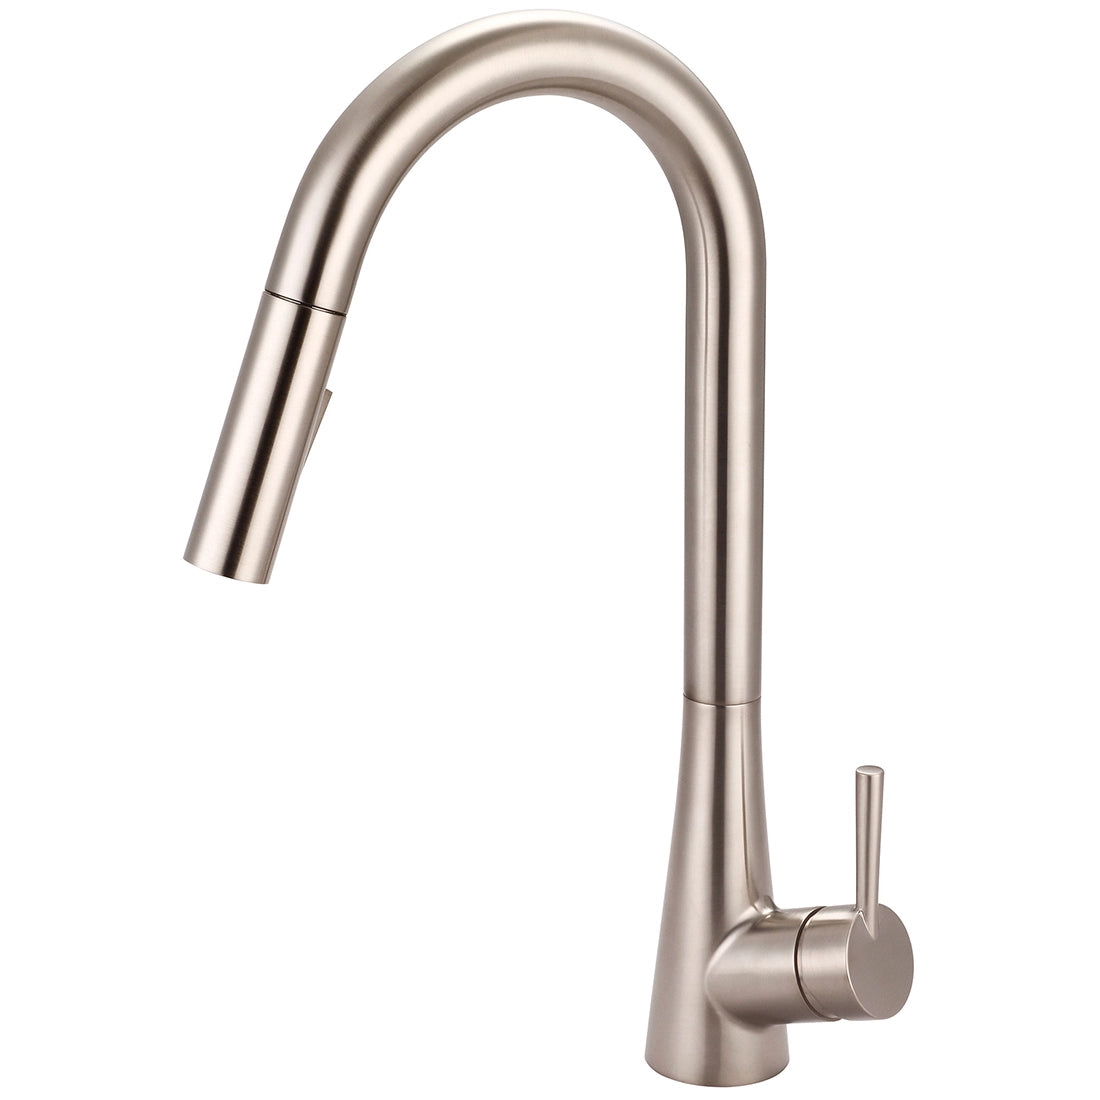 Olympia Faucets - i2 Collection - Single Handle Pull-Down Kitchen Faucet (K-5025)